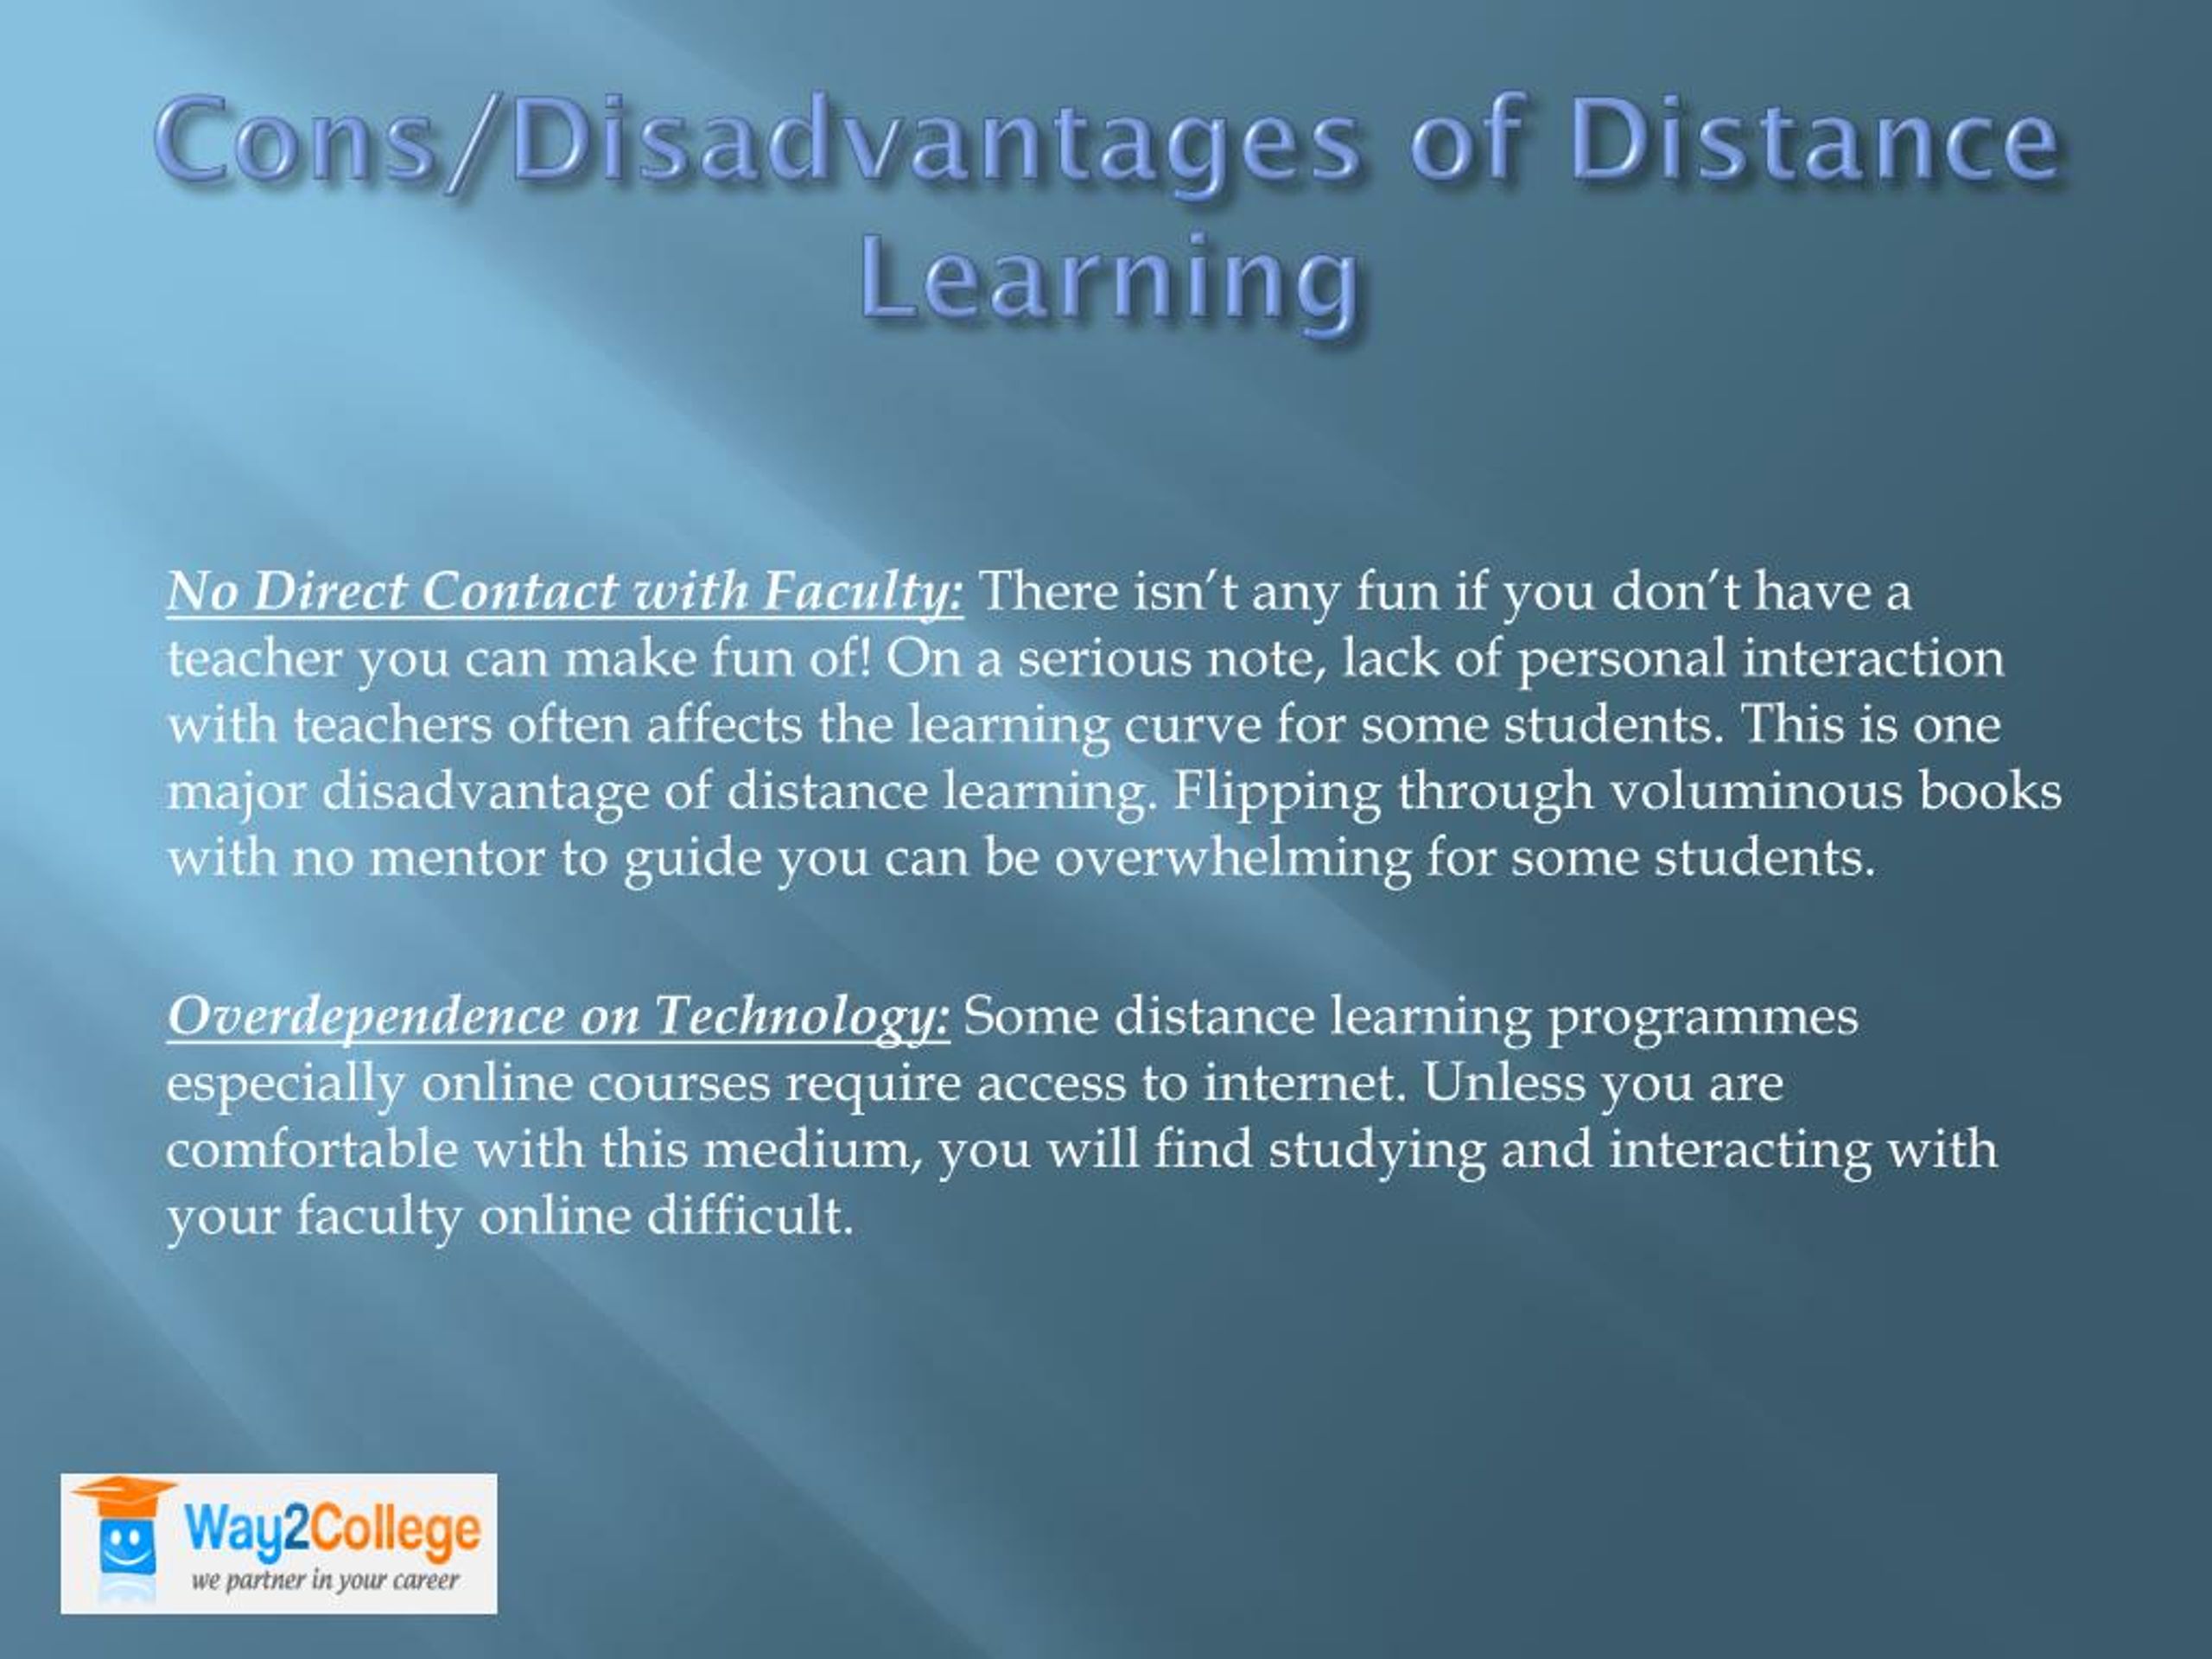 what are some disadvantages of distance learning